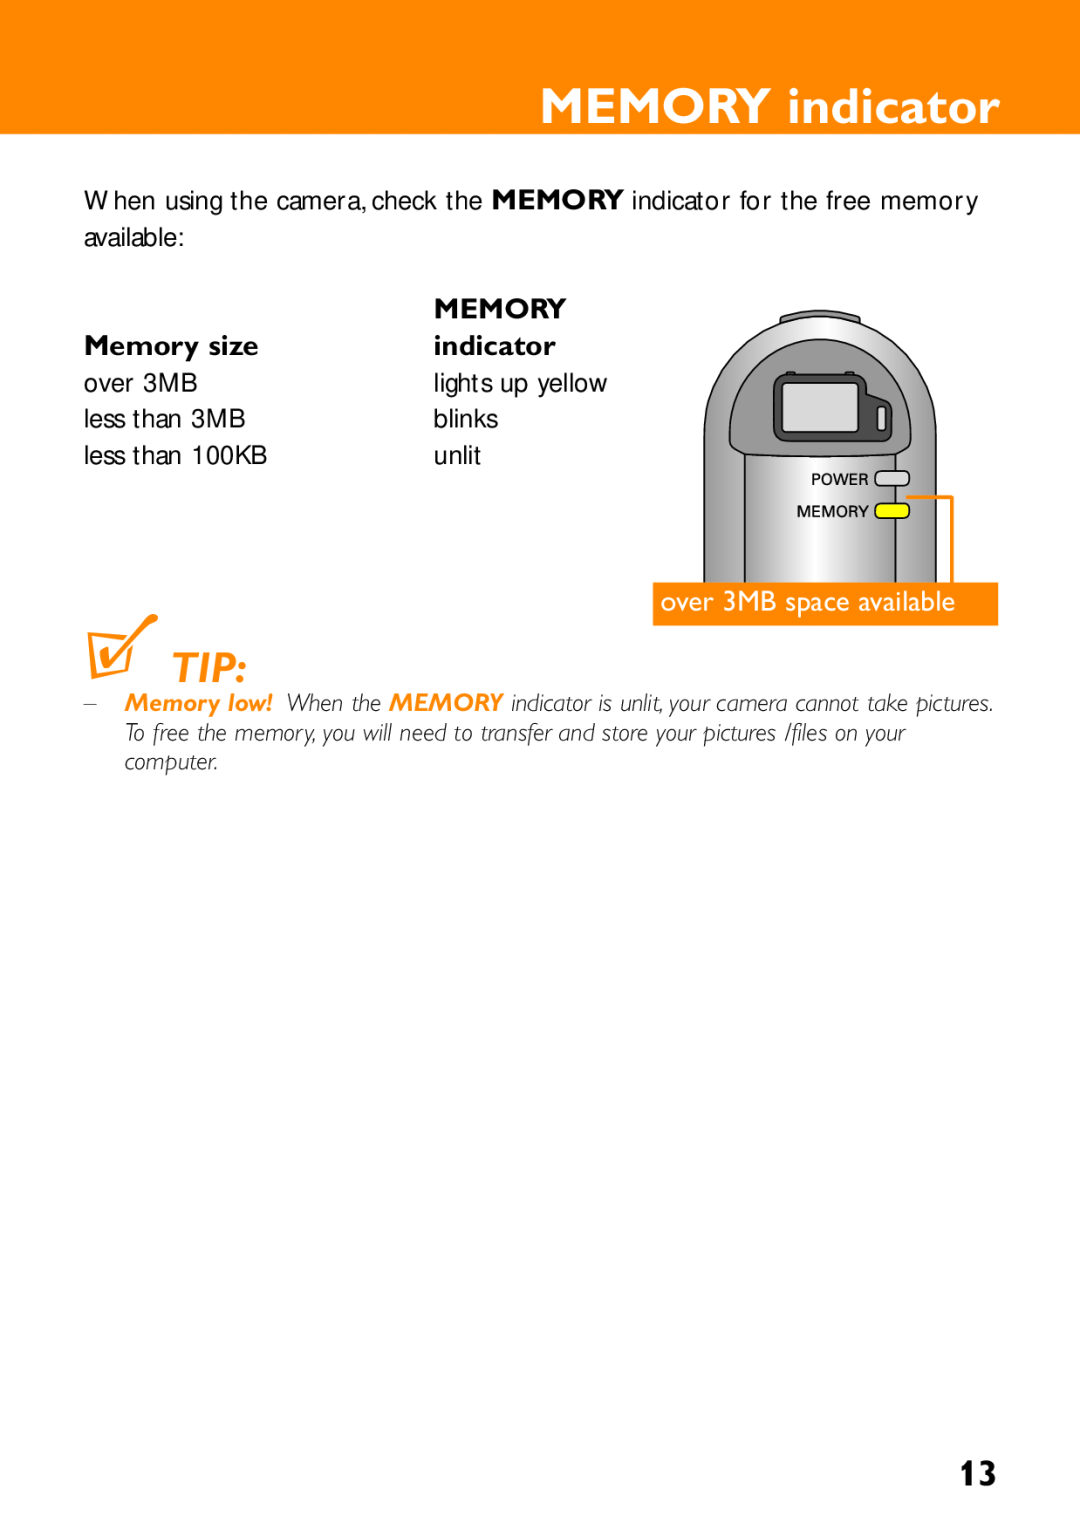 Philips KEY008, KEY0079, KEY0078 user manual MEMORY indicator, over 3MB space available, Memory size 